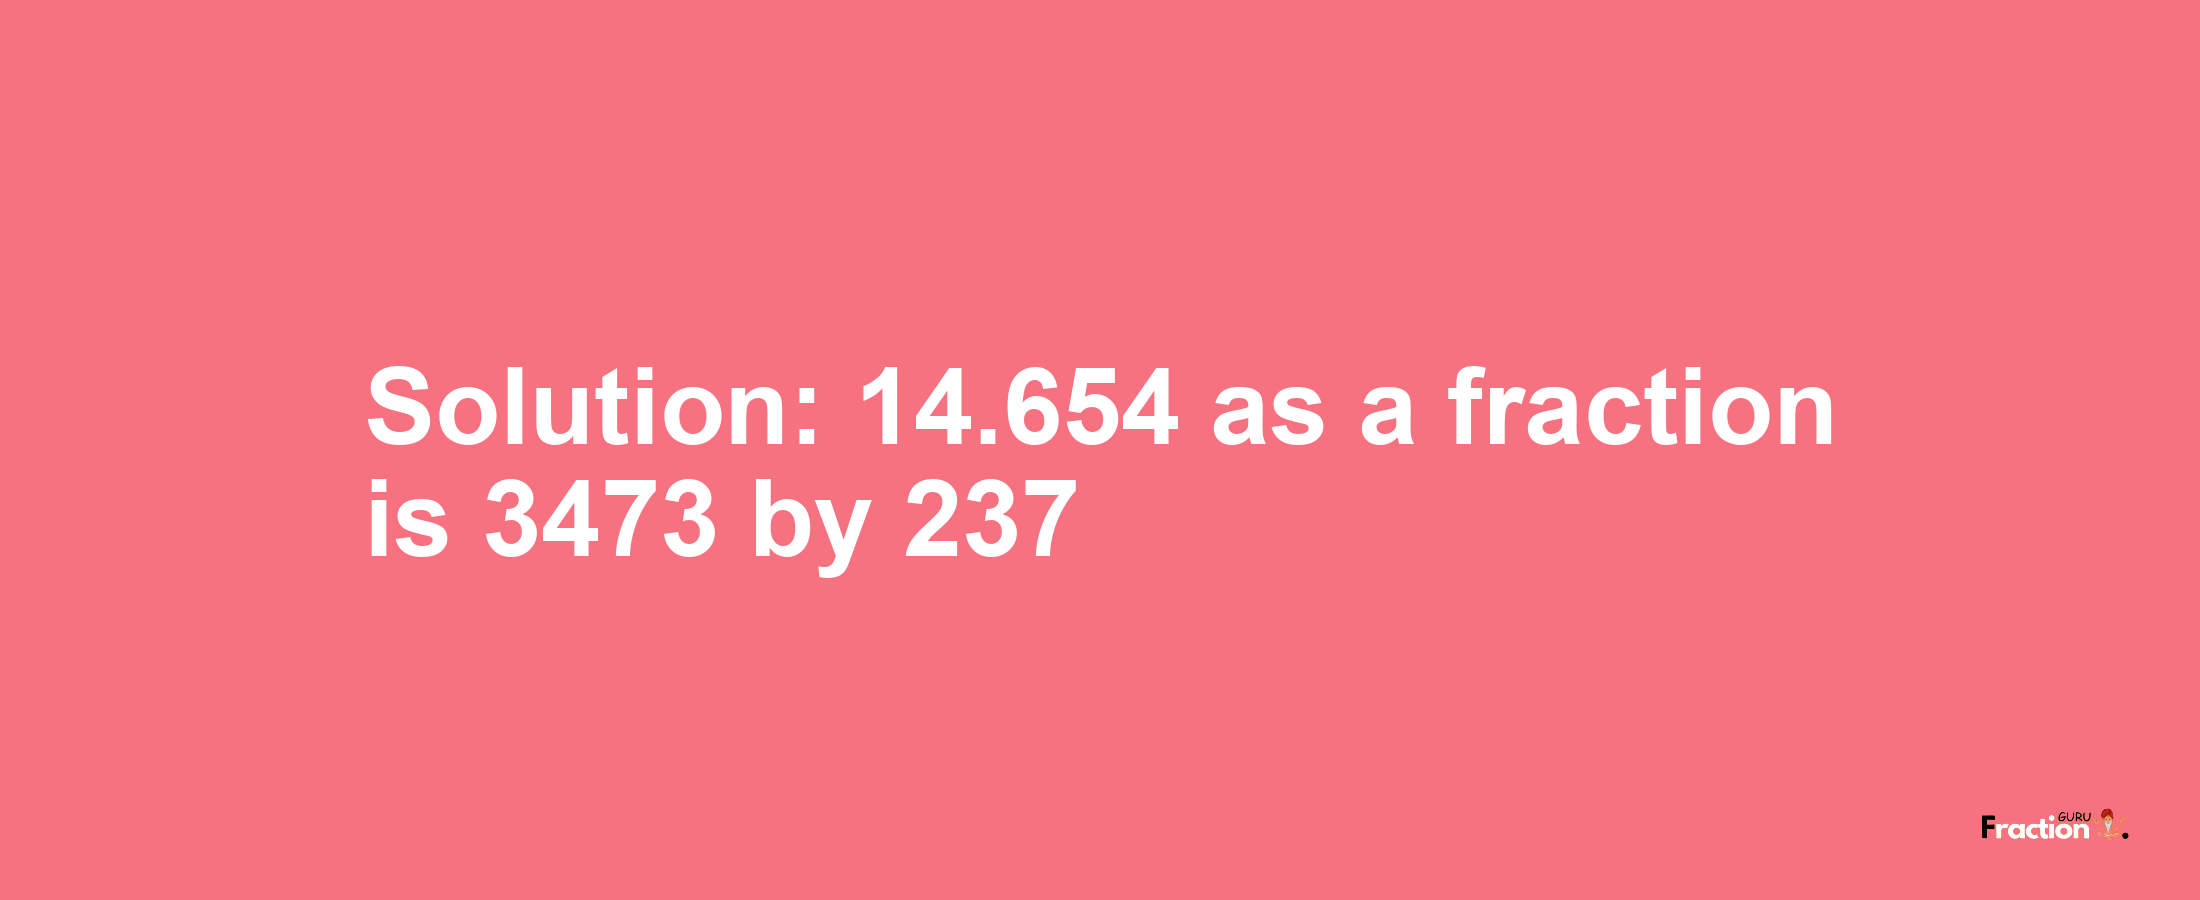 Solution:14.654 as a fraction is 3473/237